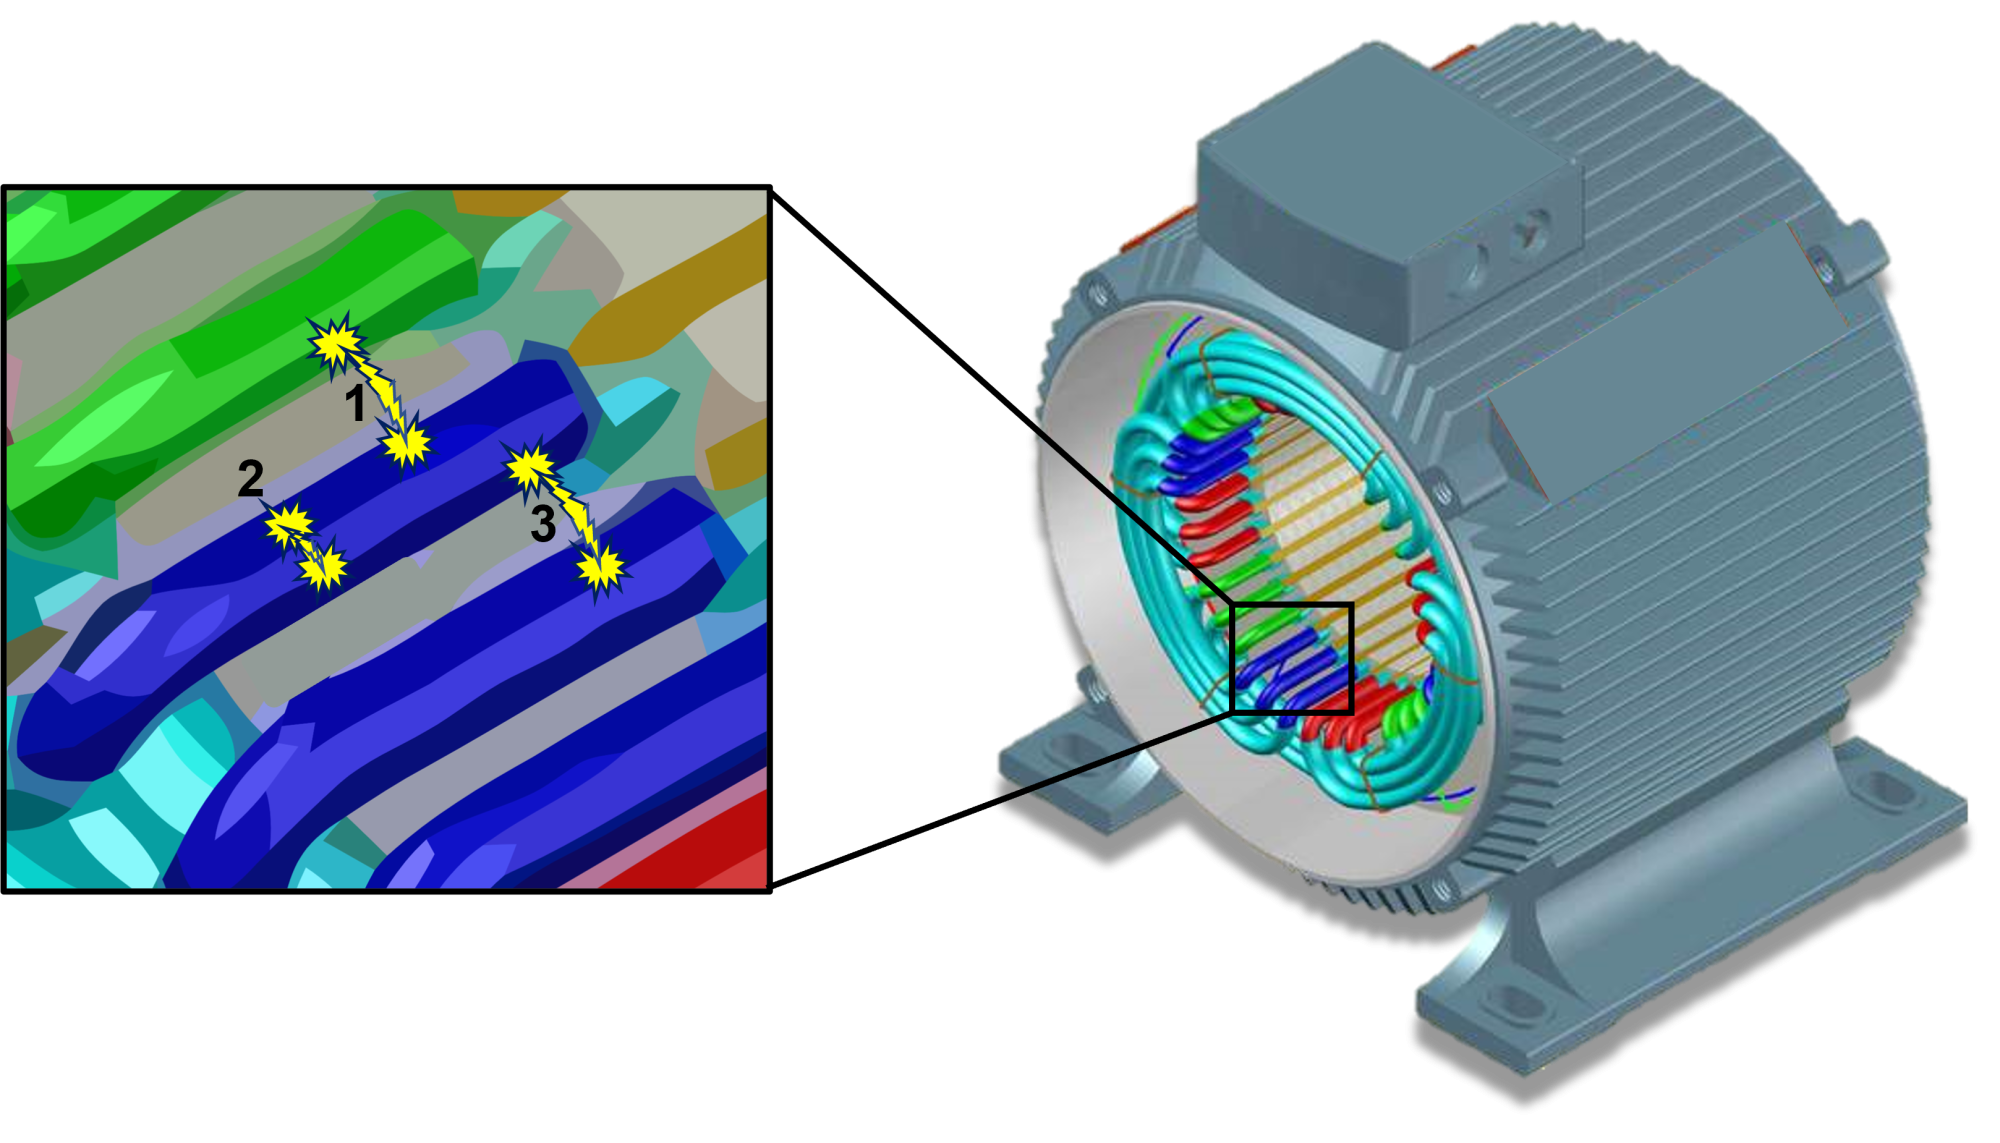 IMAGE 2: Each motor phase is highlighted with a different color winding. The surge test can find phase-to-phase (1), turn-to-turn (2), coil-to-coil (3) weaknesses and shorts.